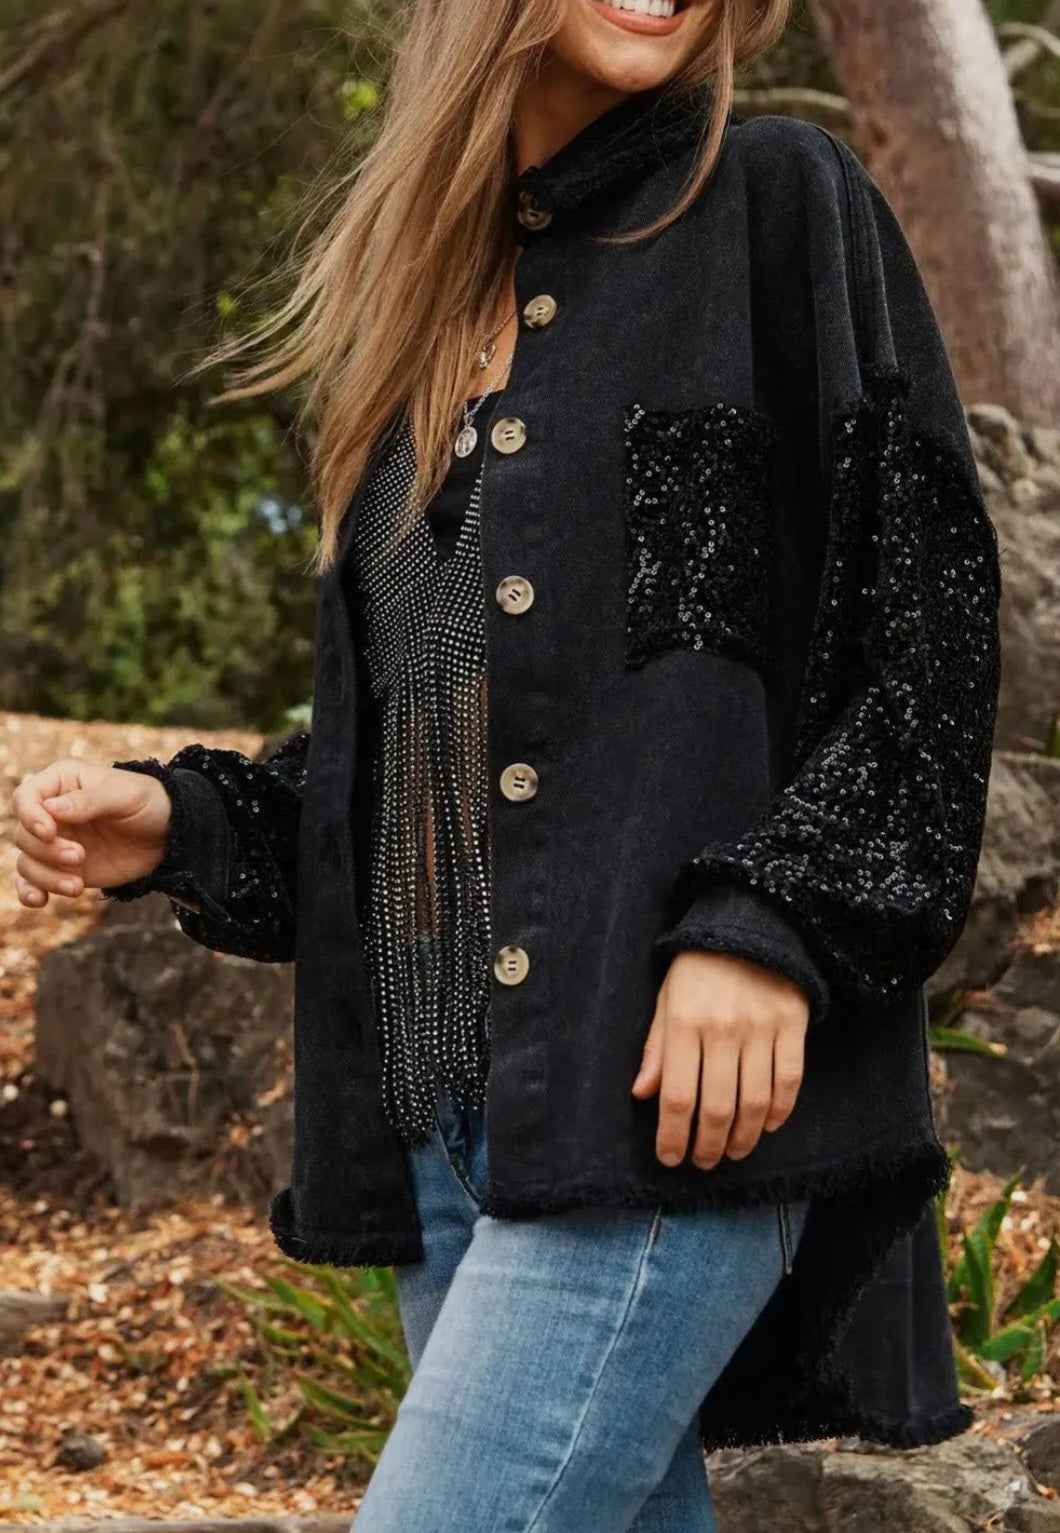 Sequin Pocket and Sleeve distressed hem detail. Button down